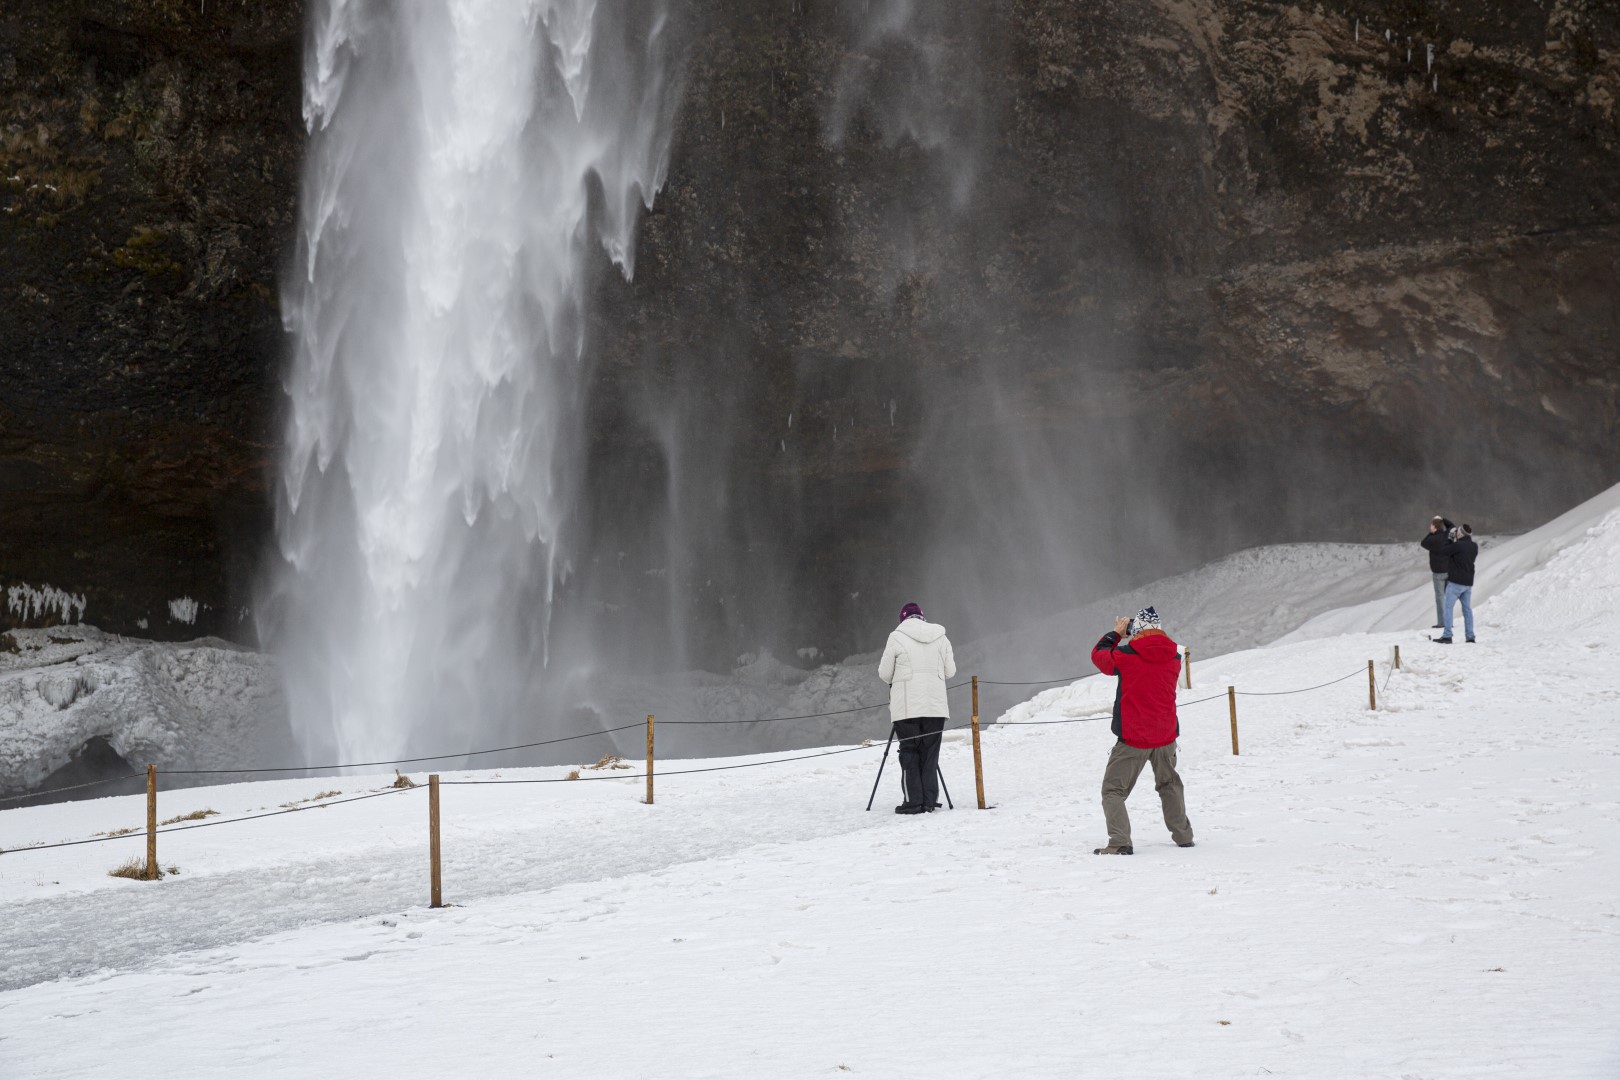 People standing behind a fence in front of Seljalandsfoss waterfall on snowy ground